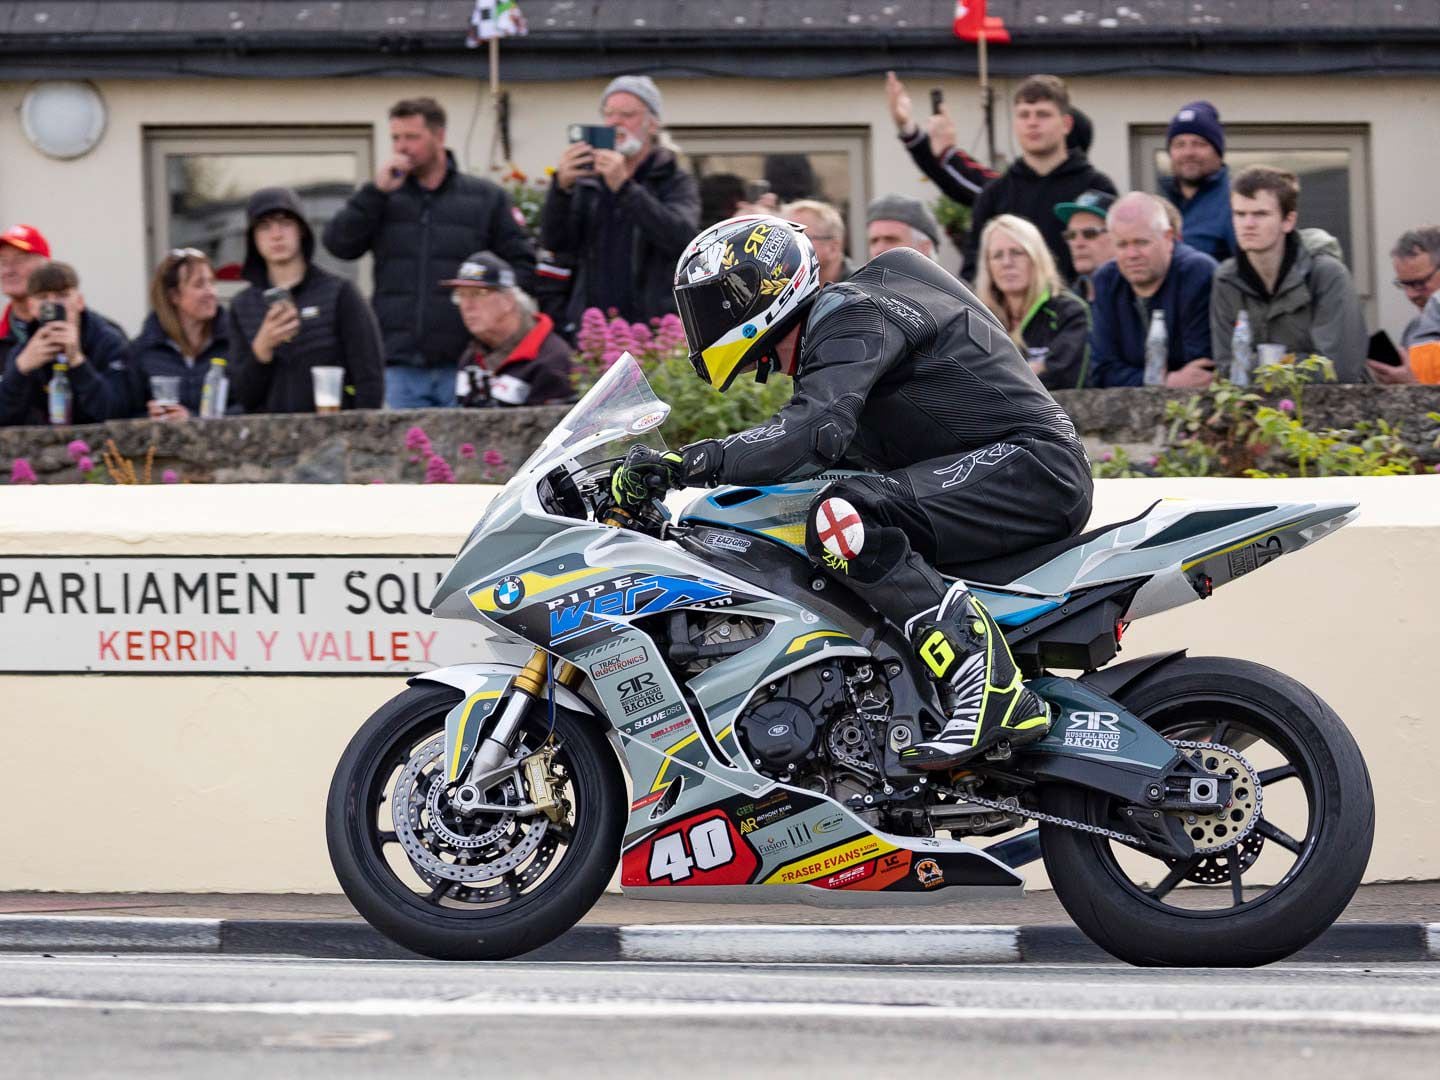 There are so many fabulous viewing spots at the TT that it’s hard to pick a favorite. In Parliament Square in Ramsey it’s possible to arrive early and get a spot in the garden of The Swan pub just a few feet from the action, which in this case is privateer Michael Russell on his BMW S 1000 RR.